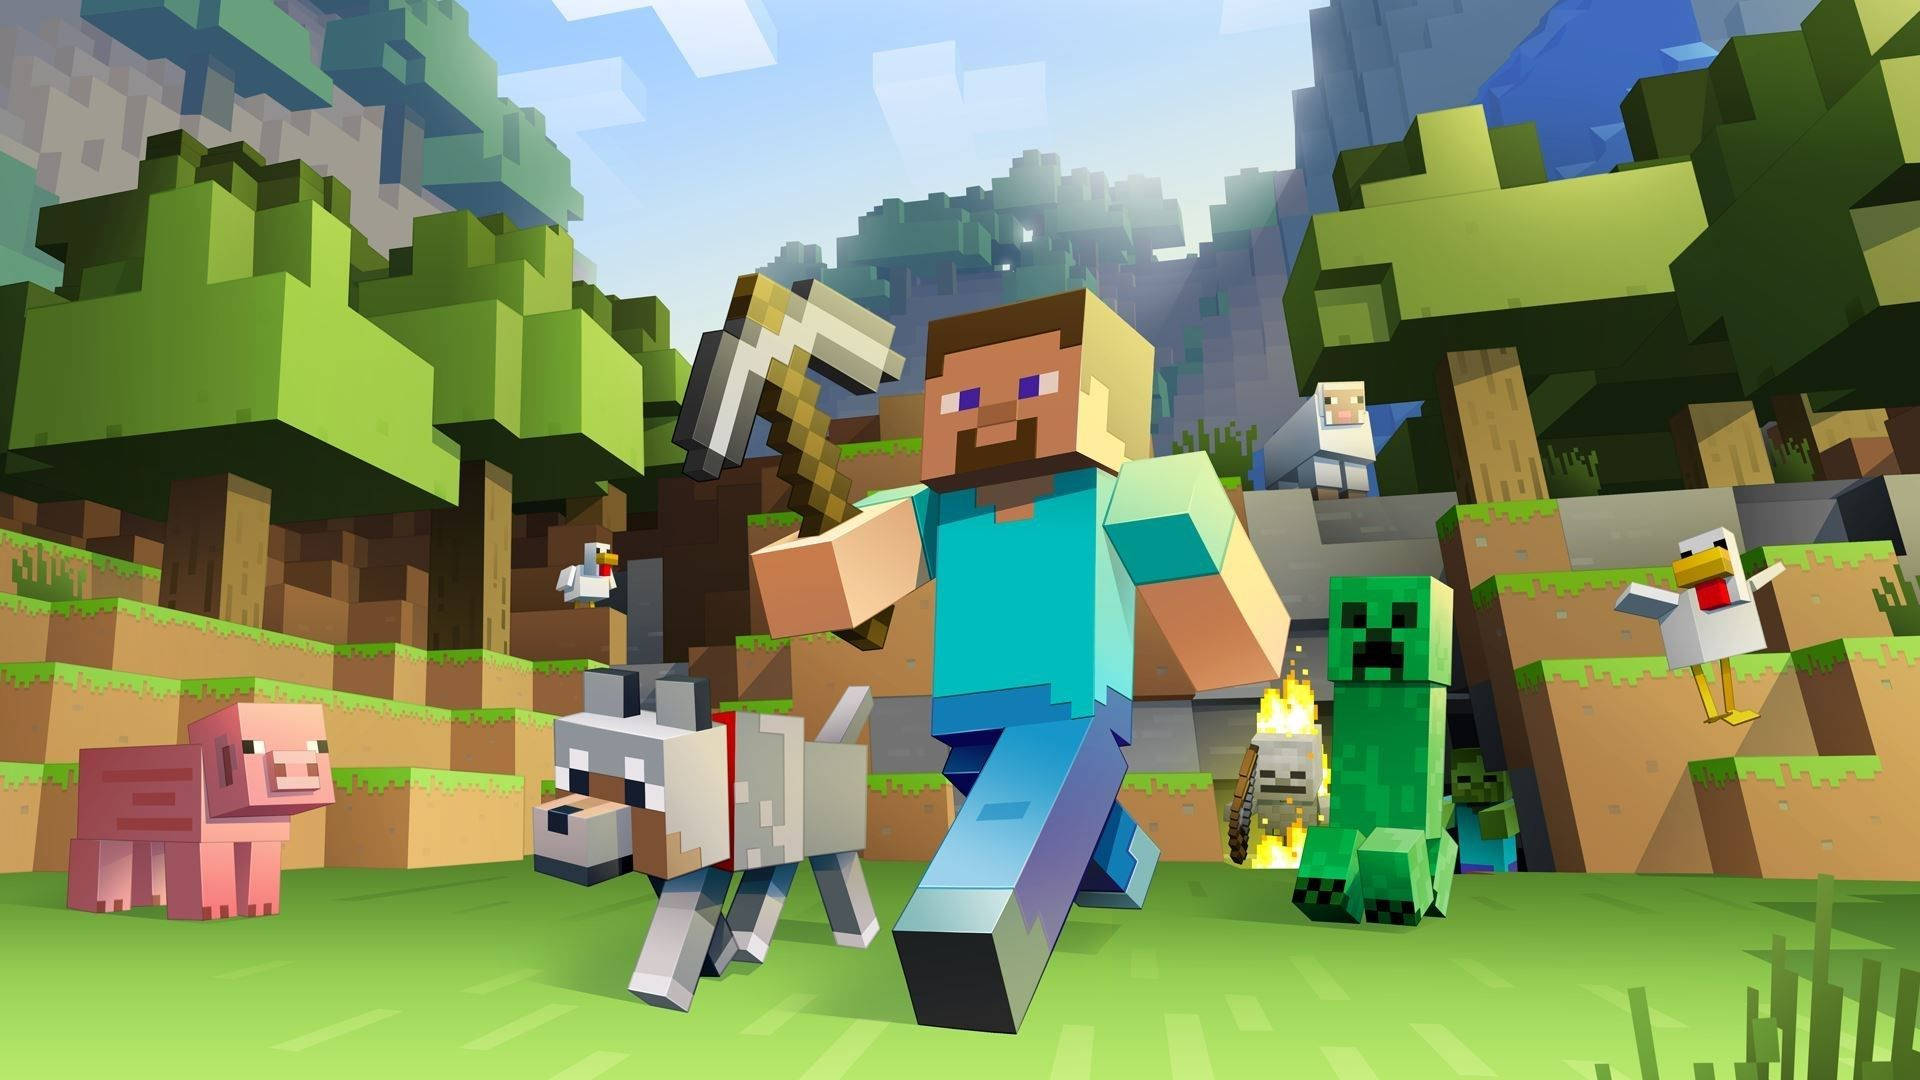 Free Minecraft Wallpaper Downloads, [700+] Minecraft Wallpapers for FREE |  